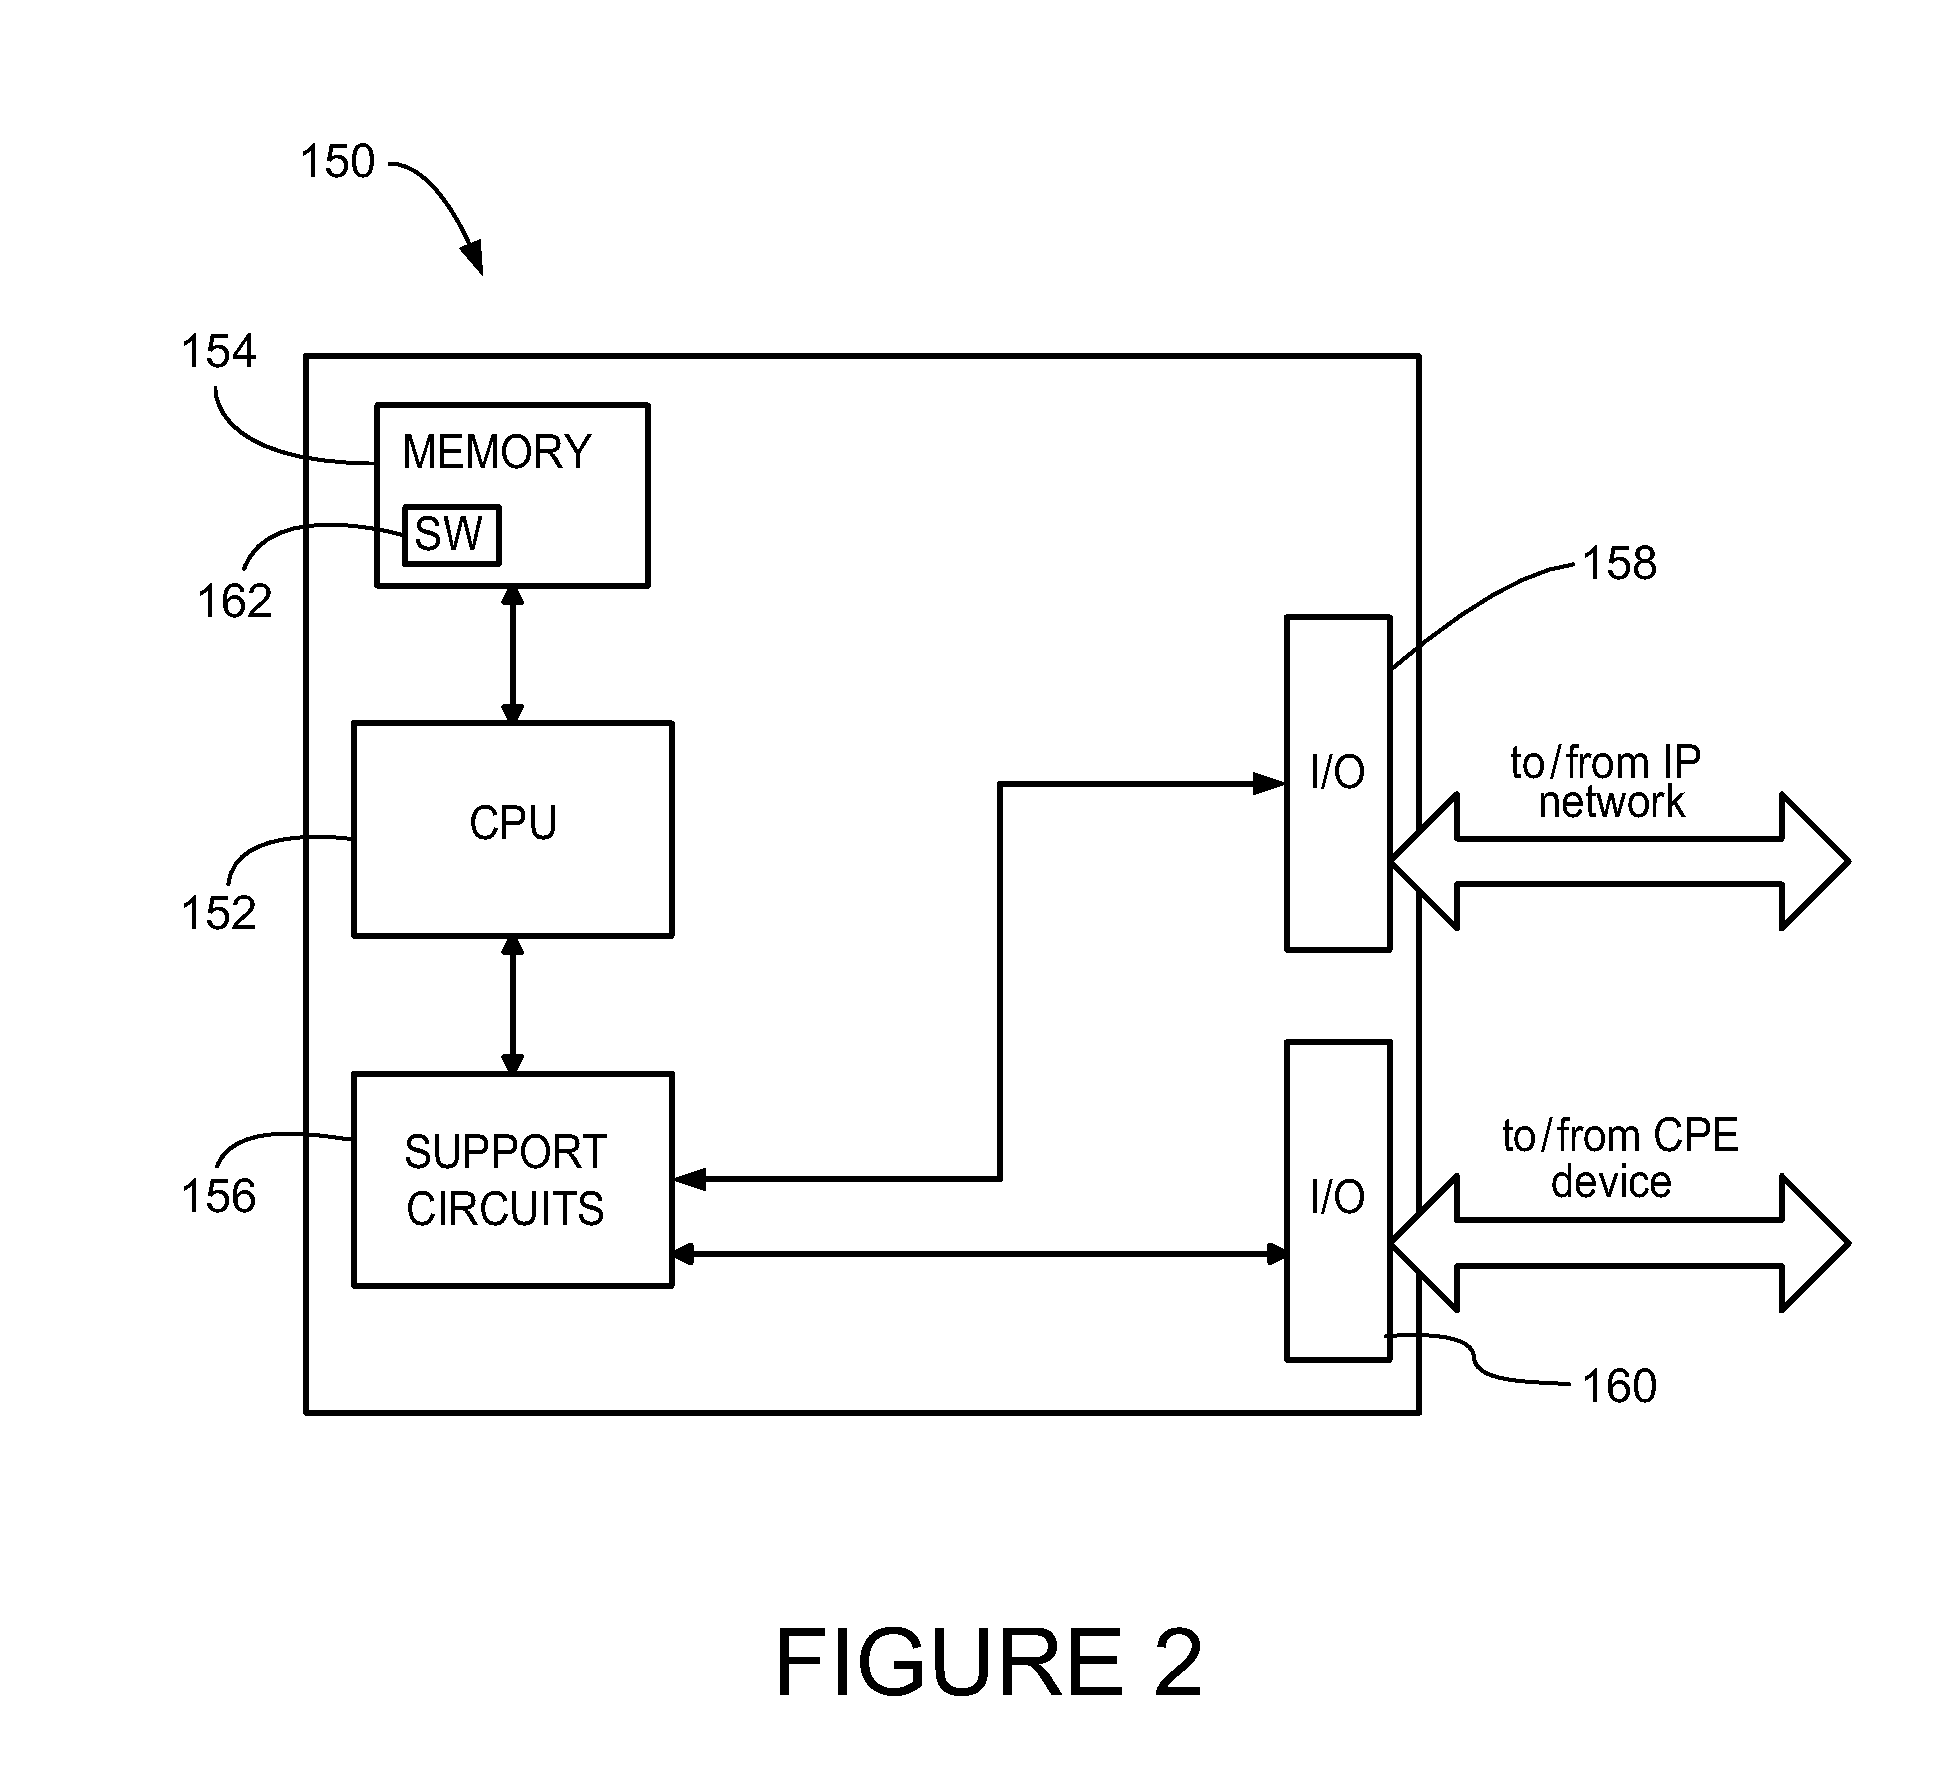 Systems and methods of monitoring call quality